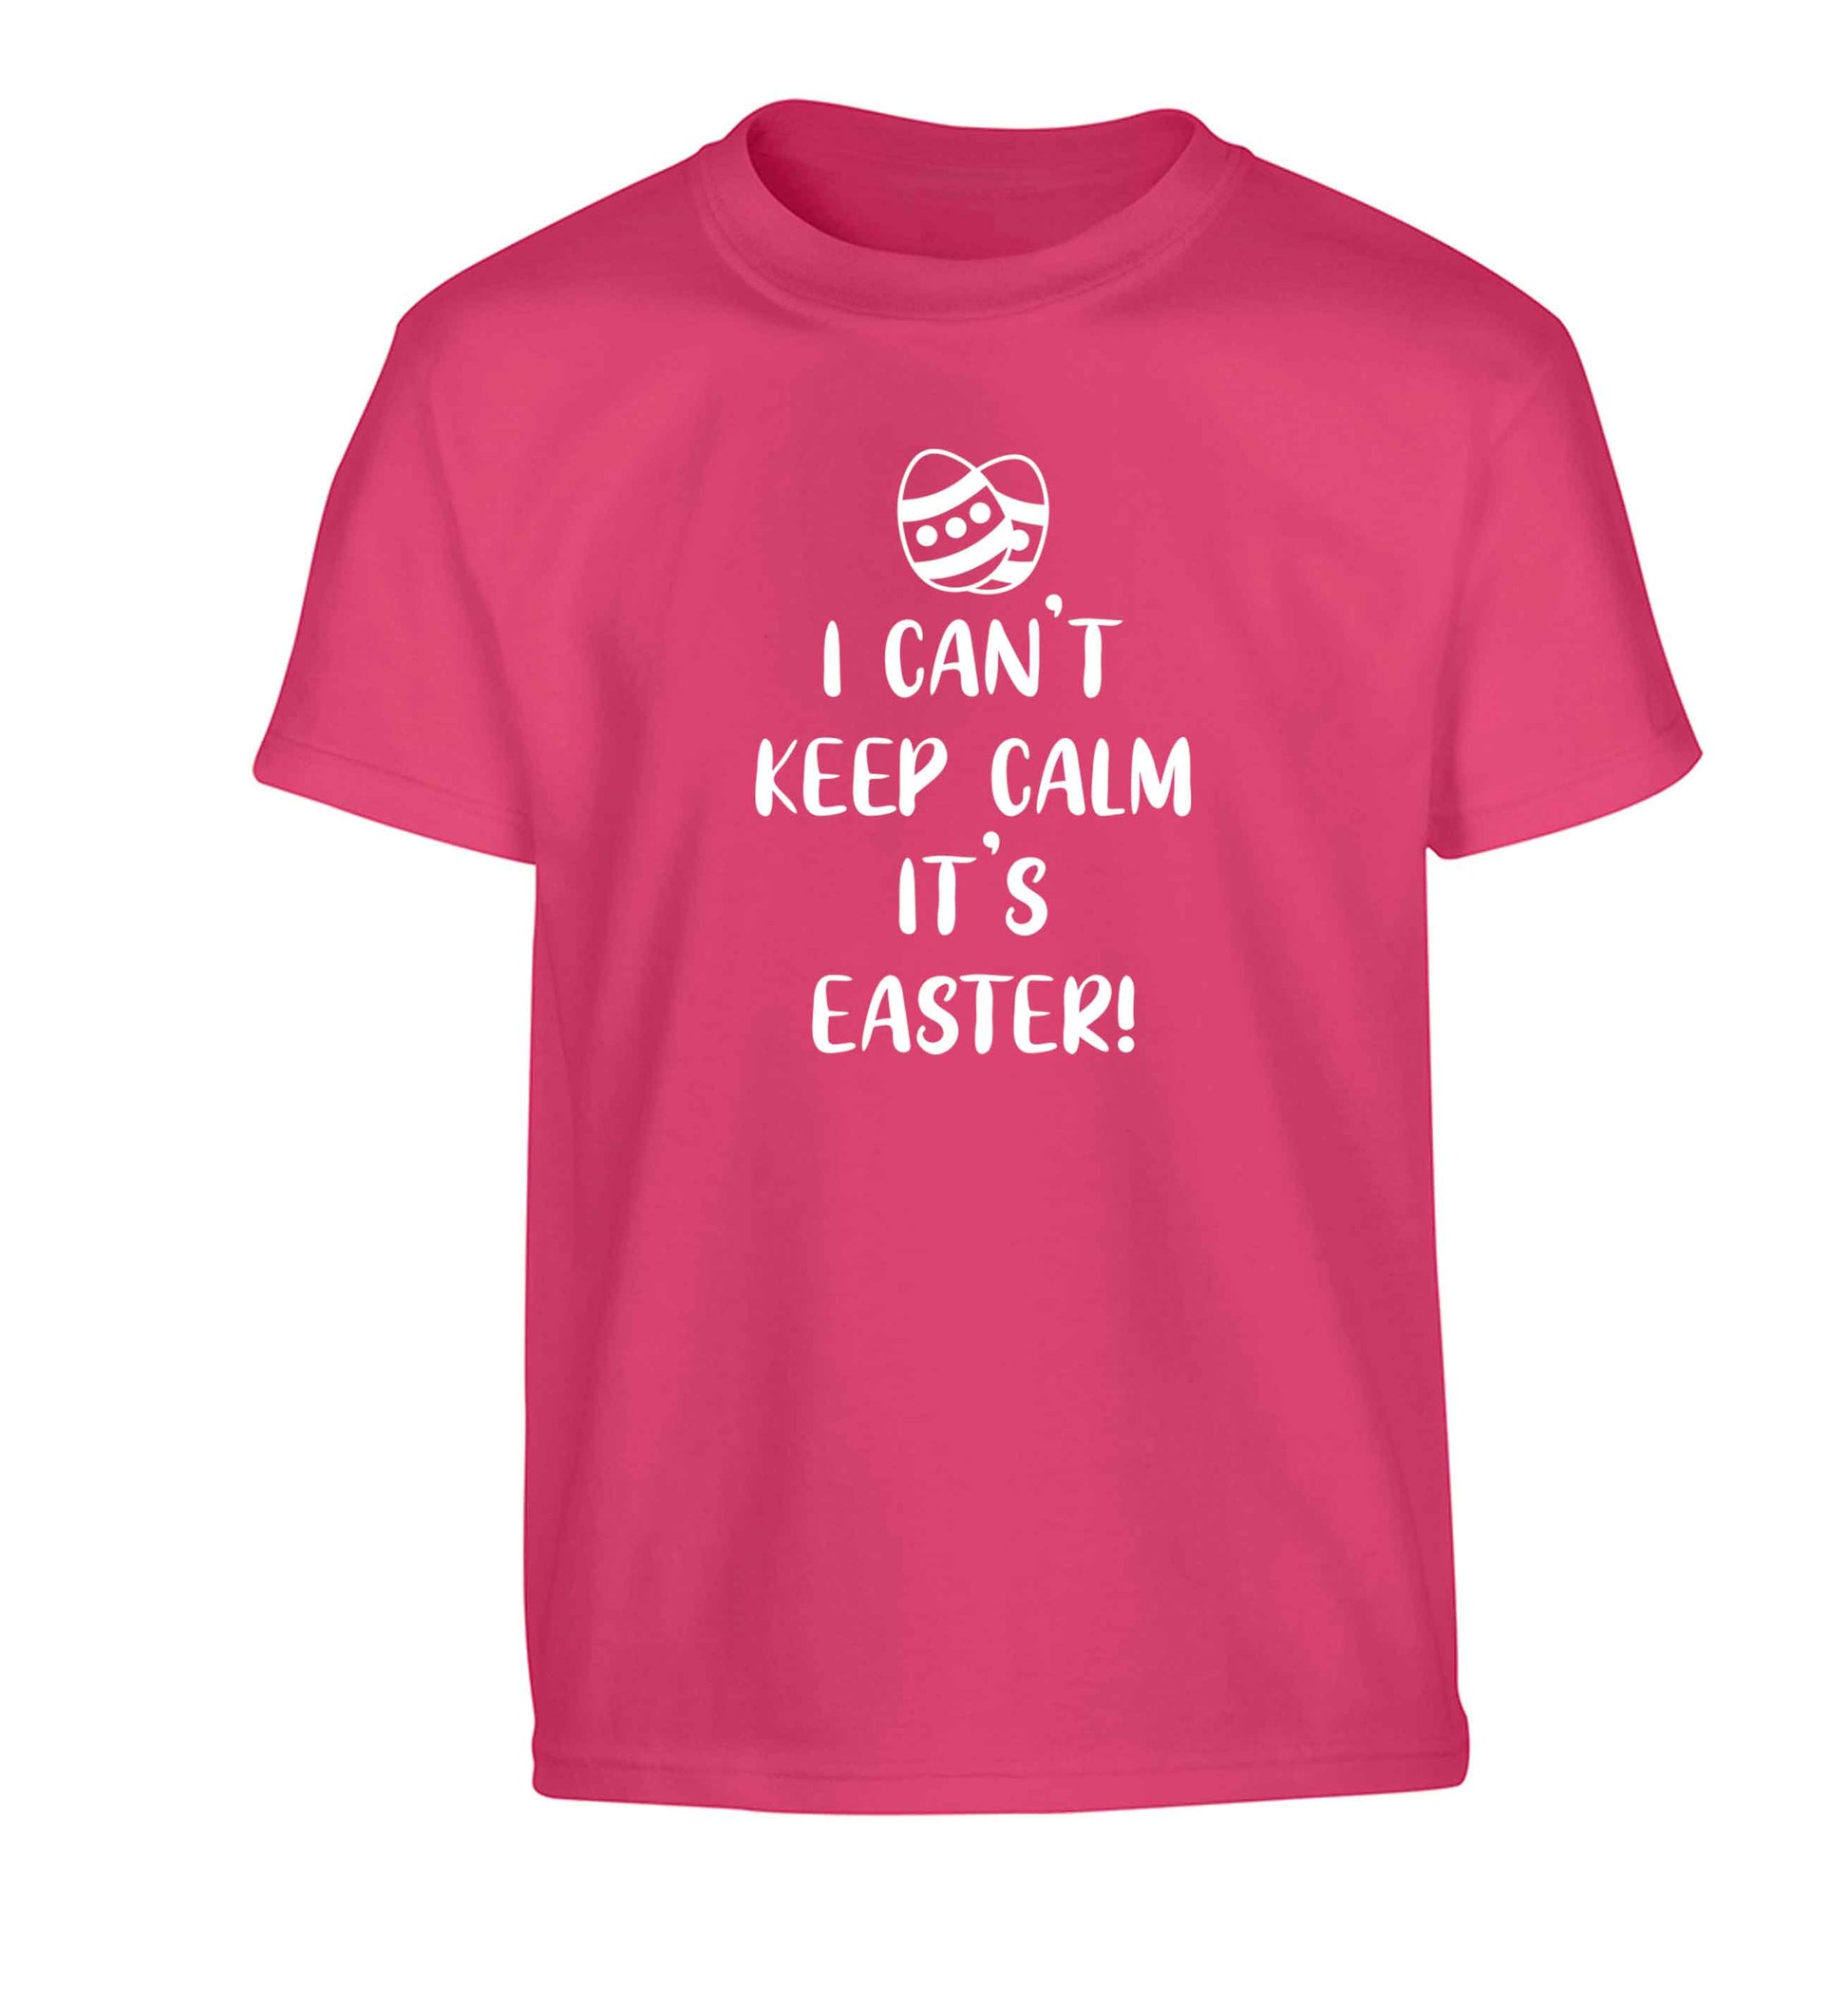 I can't keep calm it's Easter Children's pink Tshirt 12-13 Years